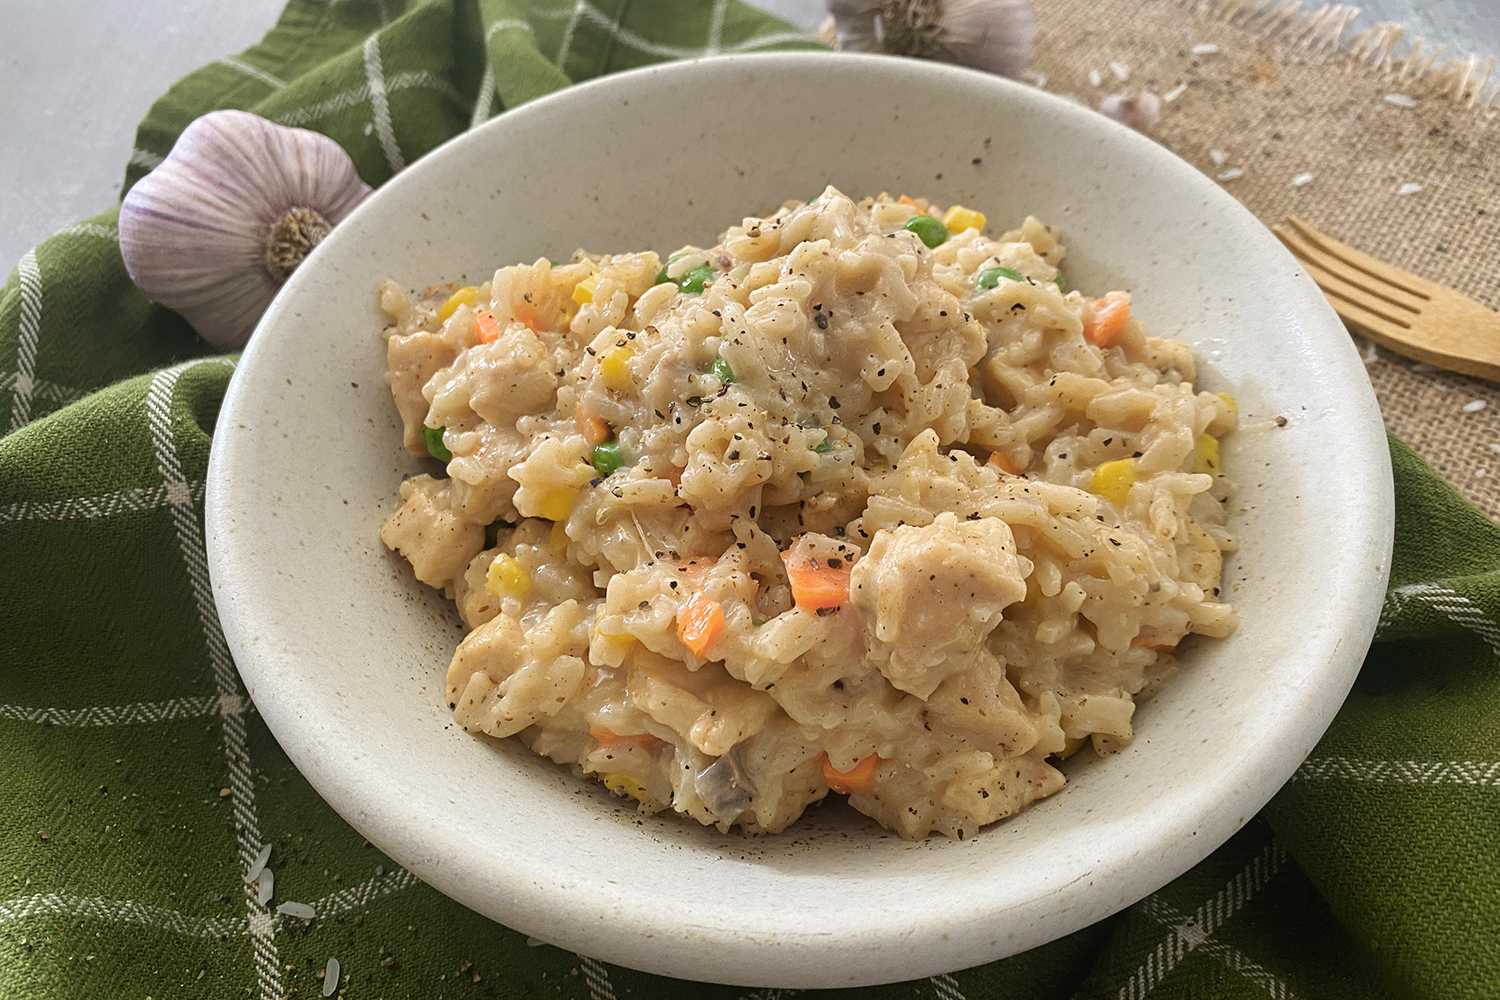 Cheesy mixture of rice, chicken cubes, carrot, corn and peas in white bowl.